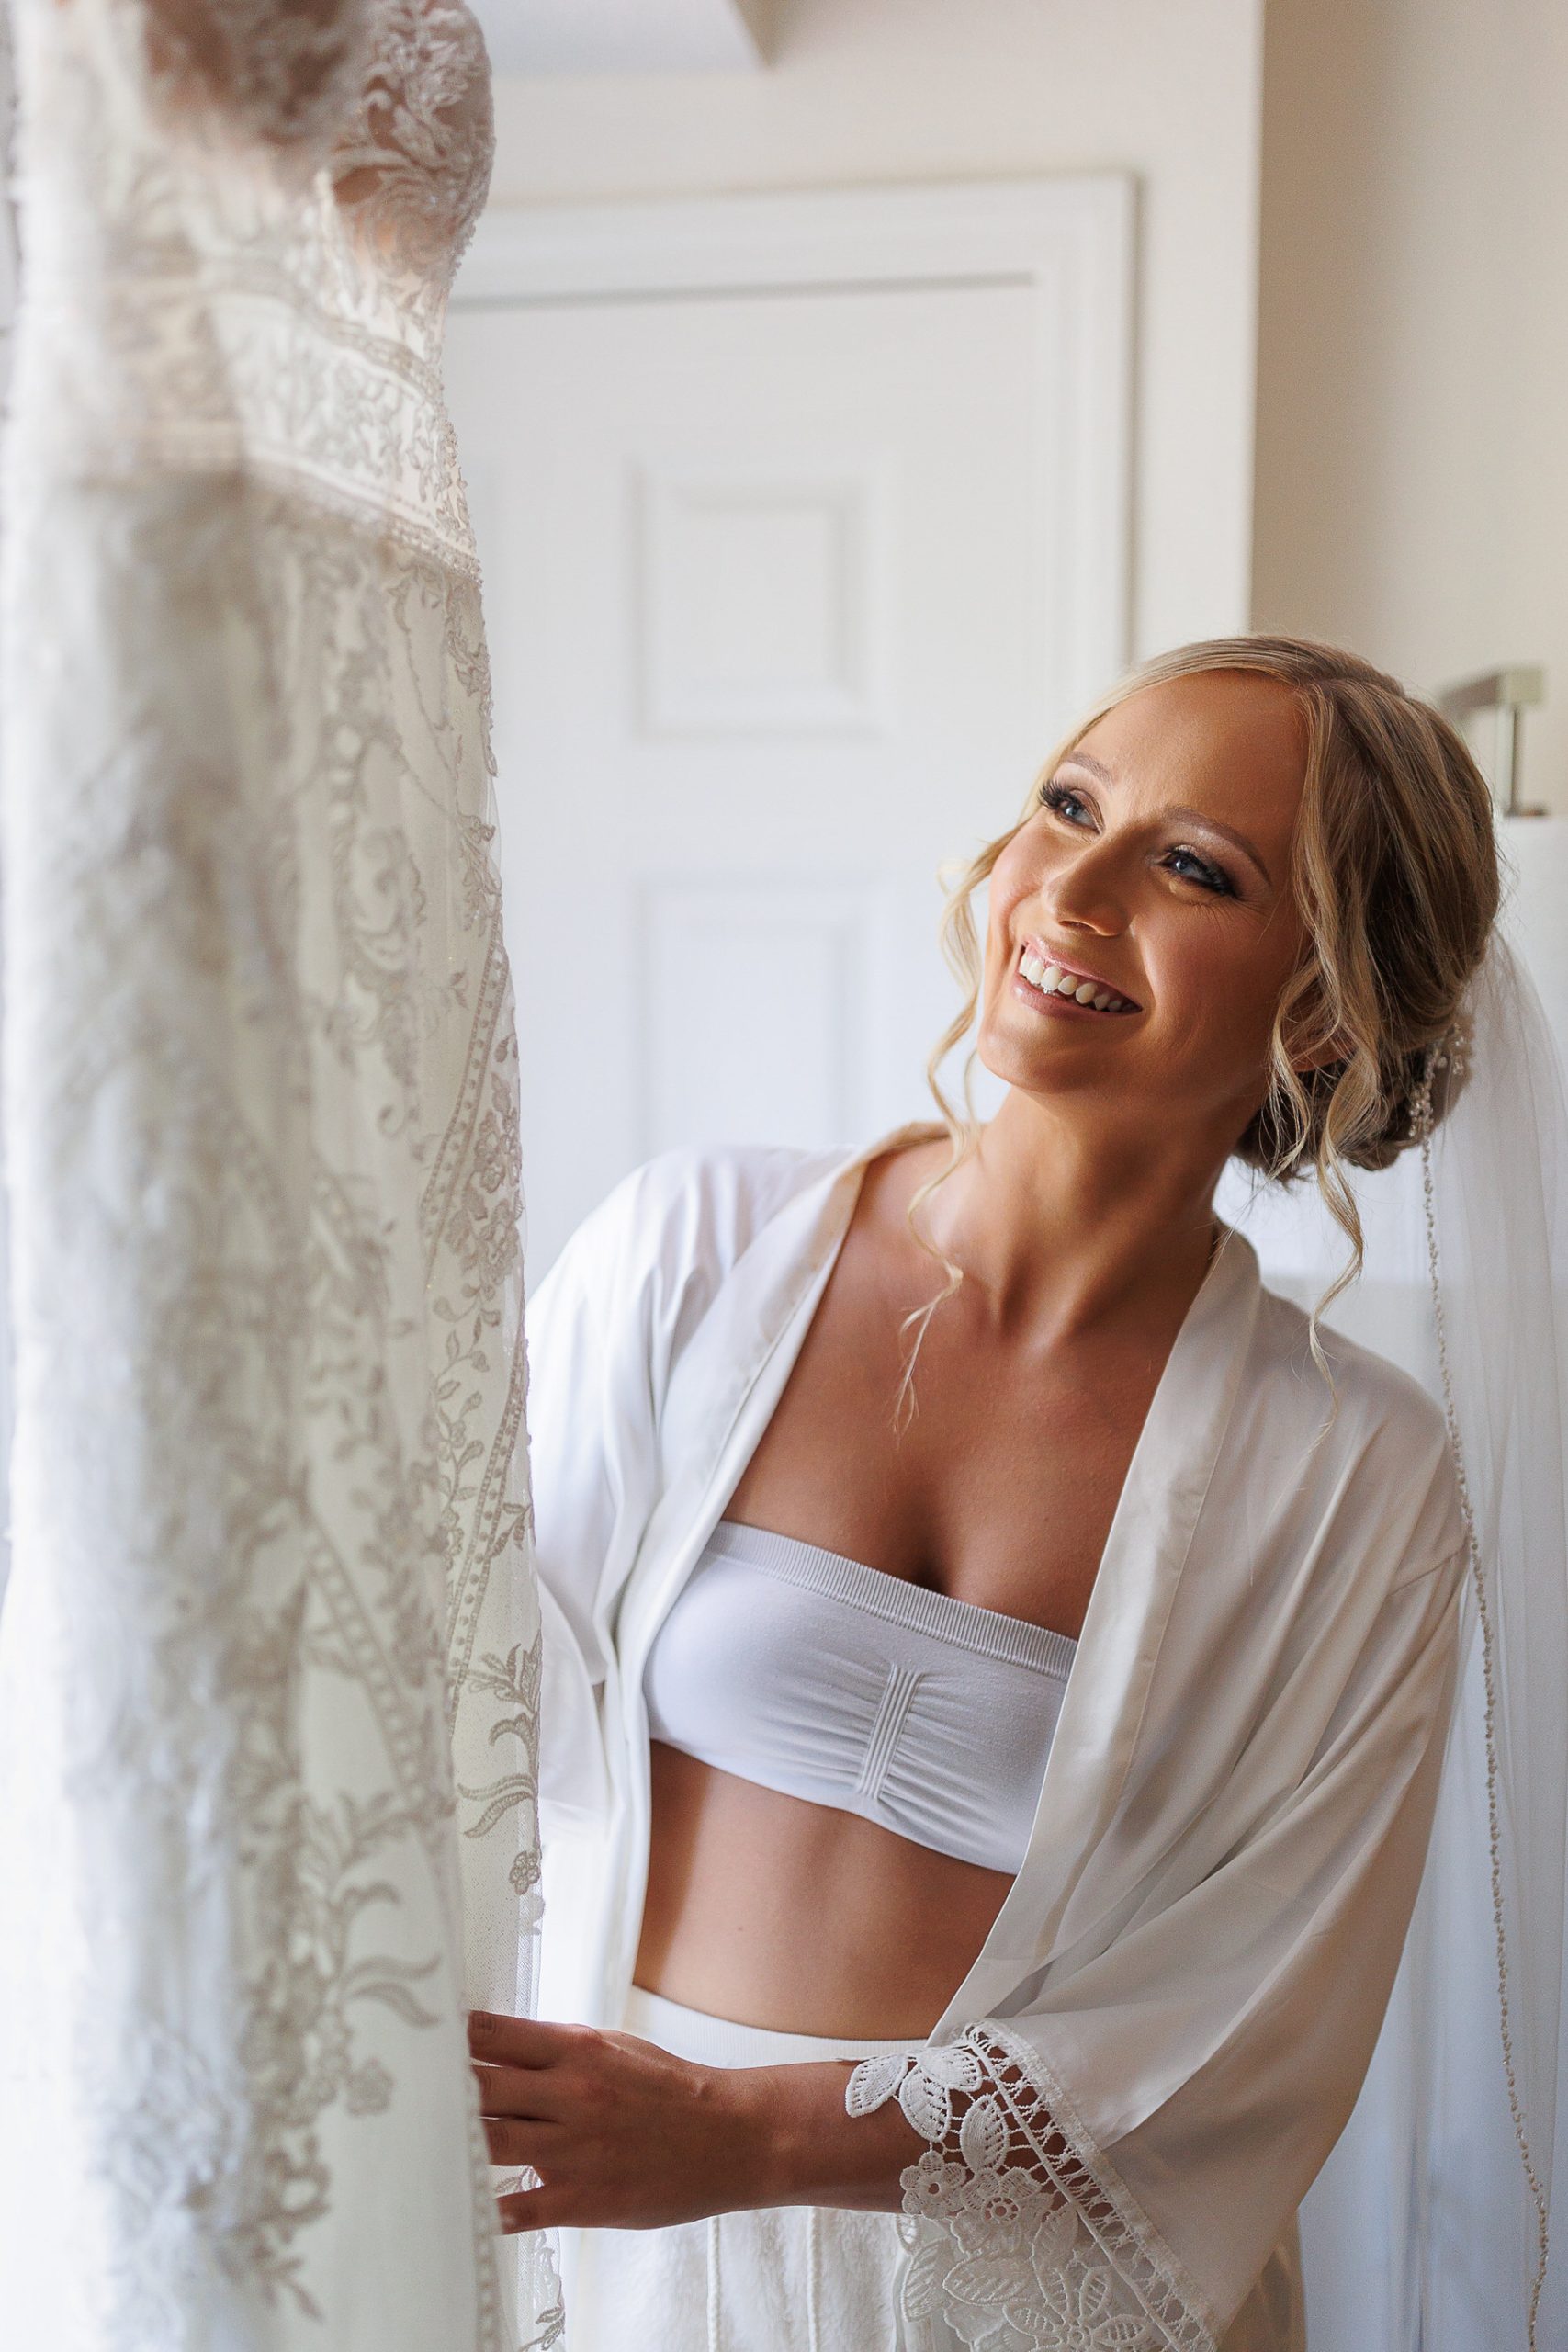 A bride in a white robe smiles as she looks at her wedding dress hanging by the door, envisioning the moments that will soon be captured in her wedding photography.